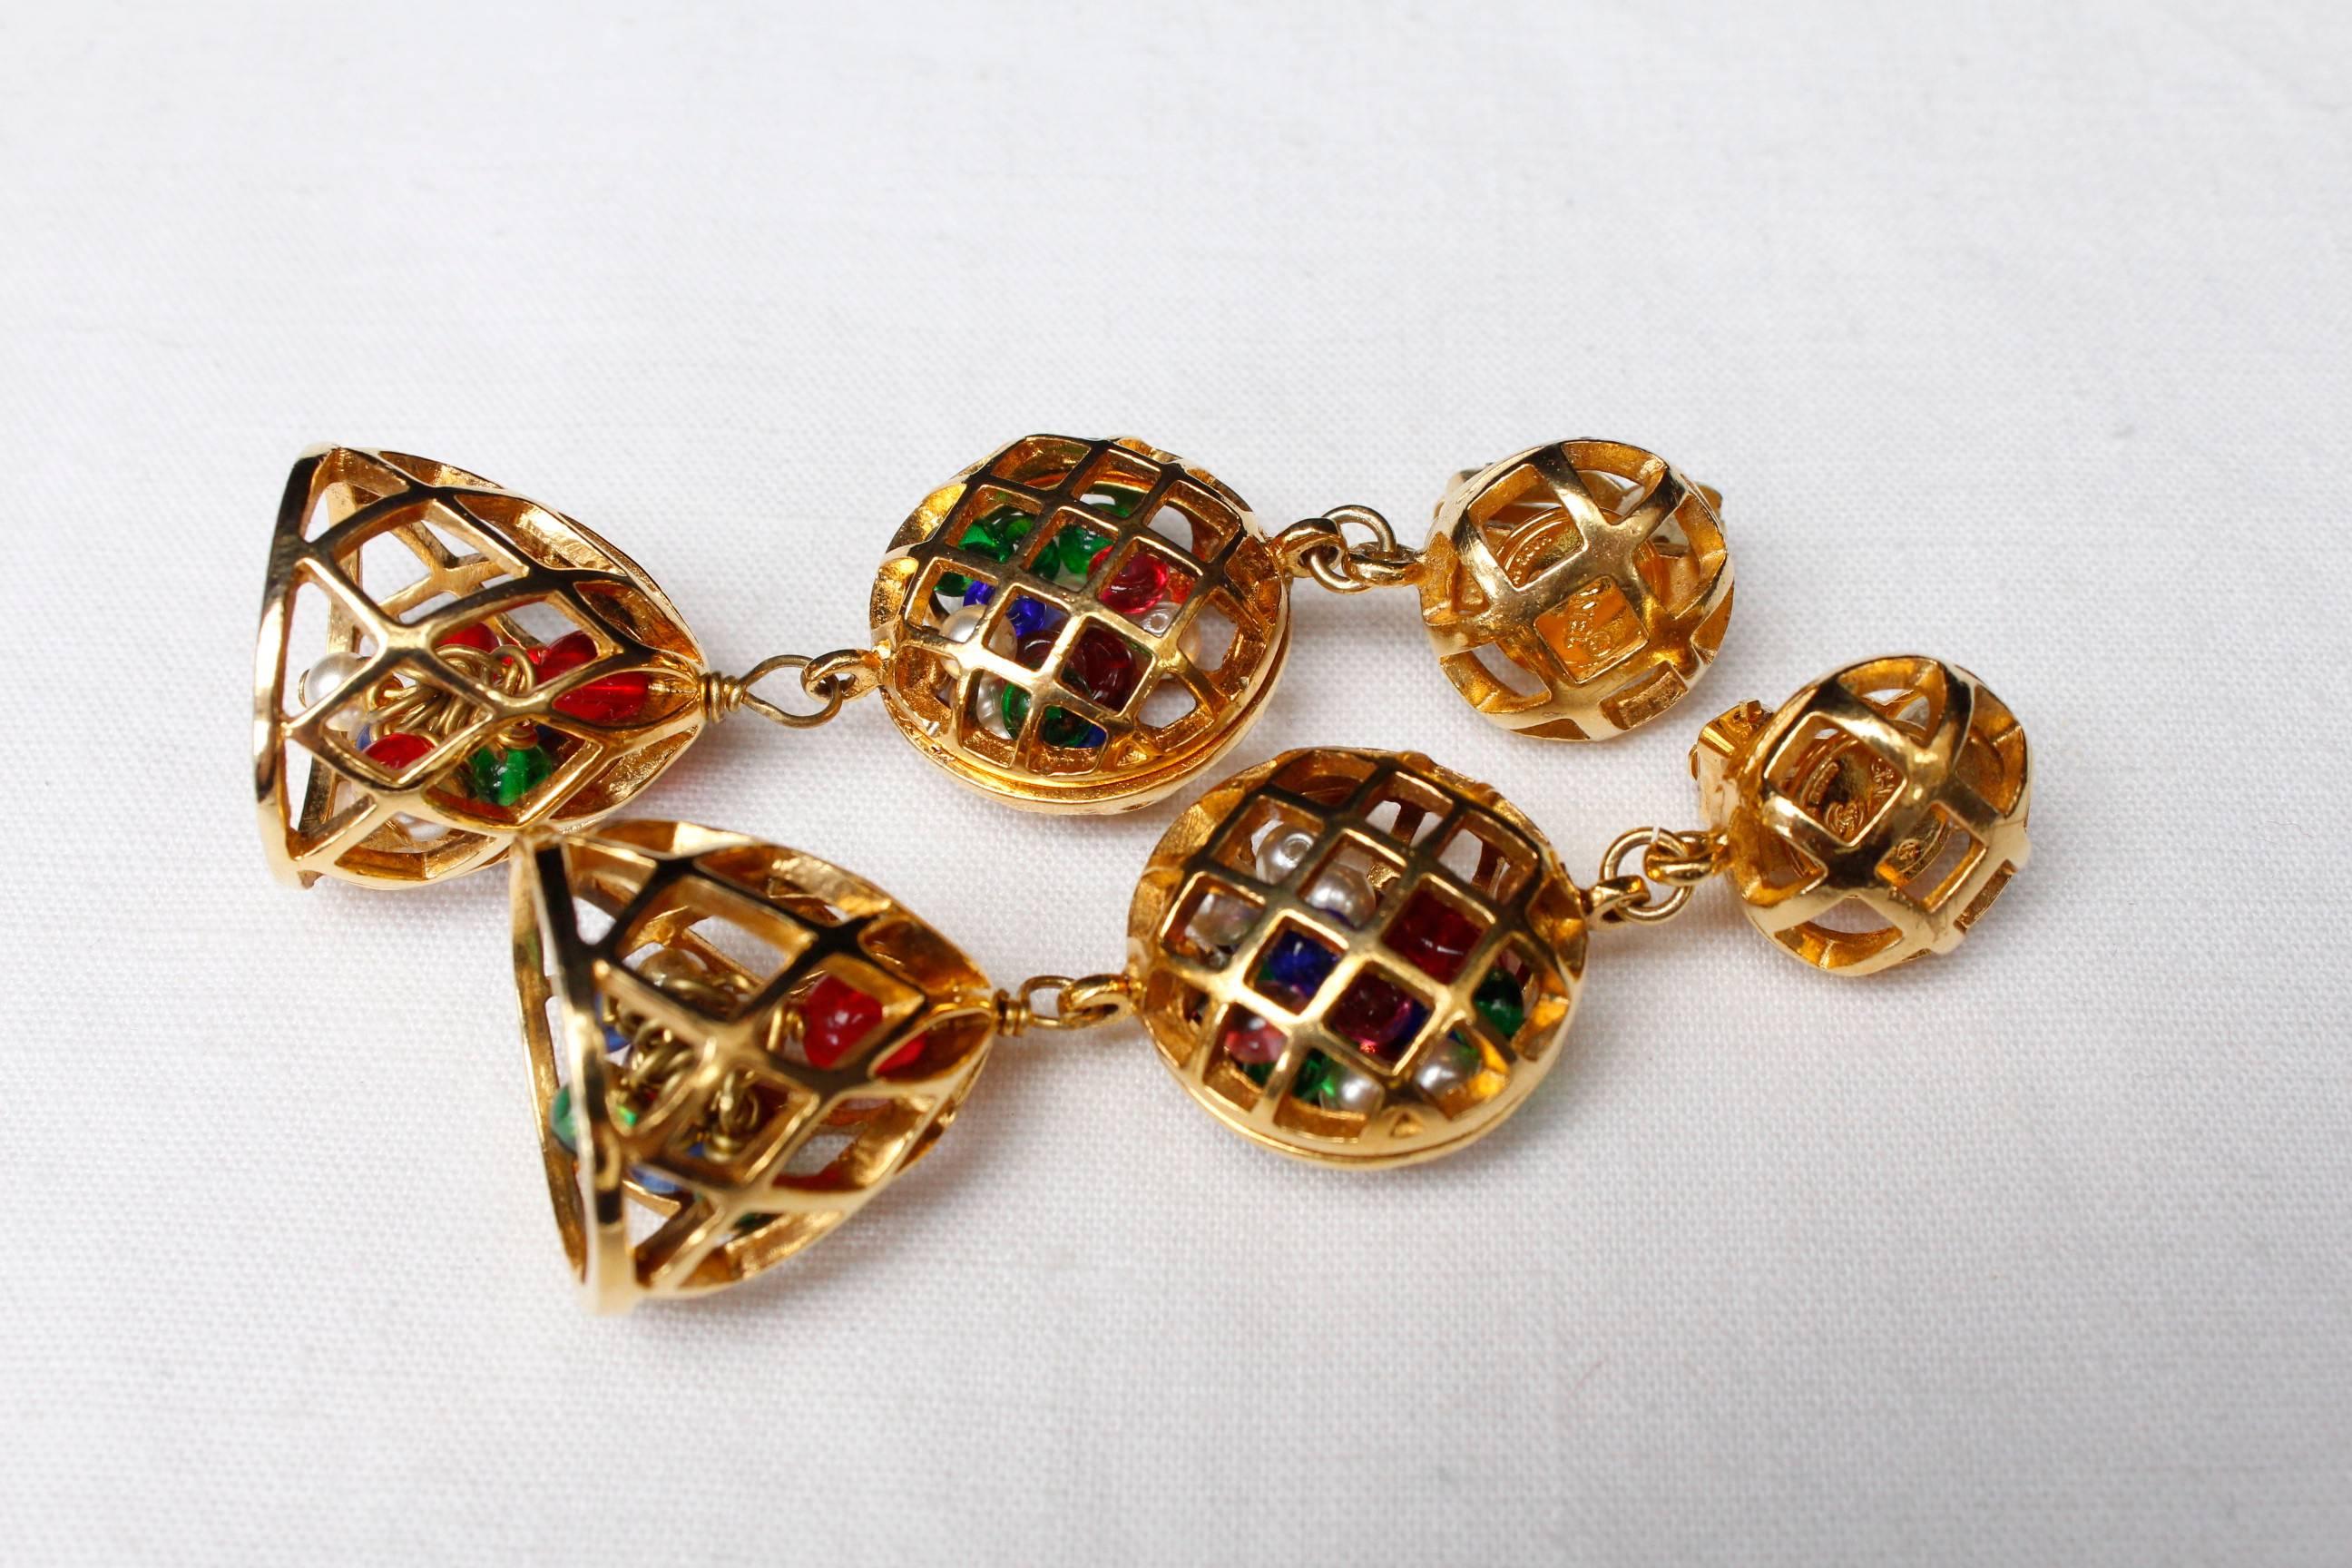 Women's 1980s Chanel clip-on earrings representing gilded metal cages